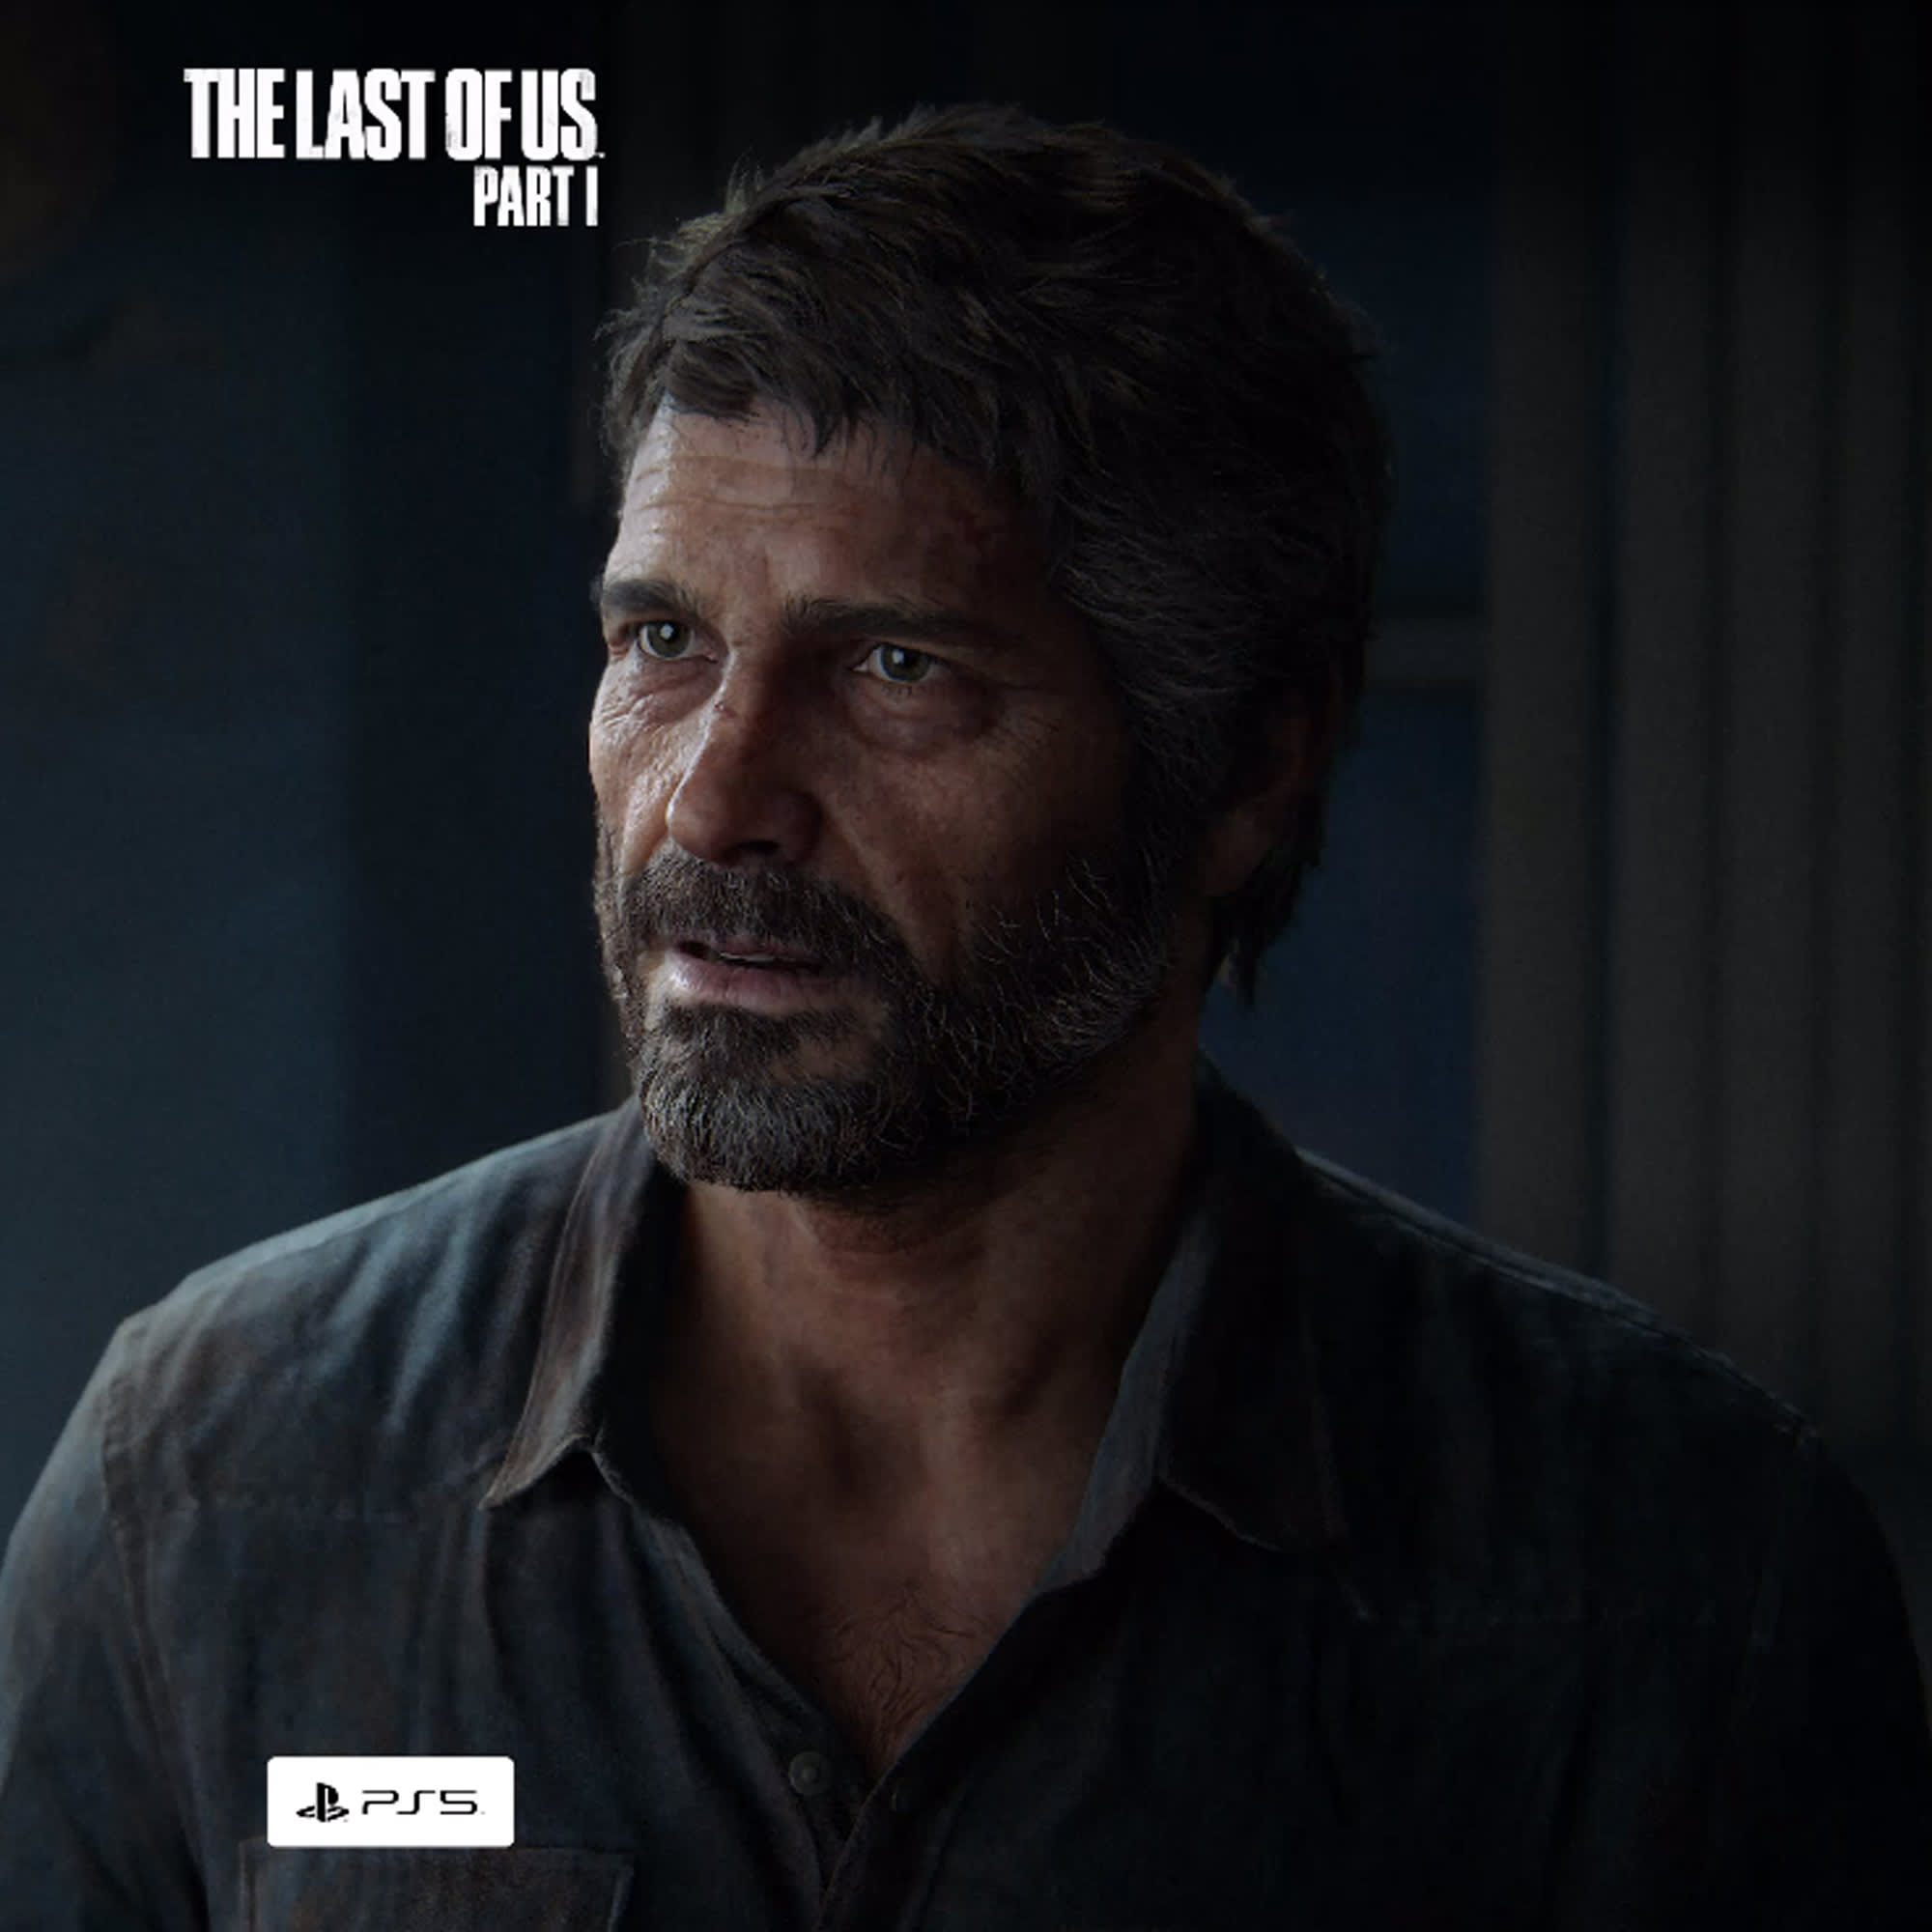 The Last of Us Part 1 PC features unlocked framerate, speedrun and  permadeath modes